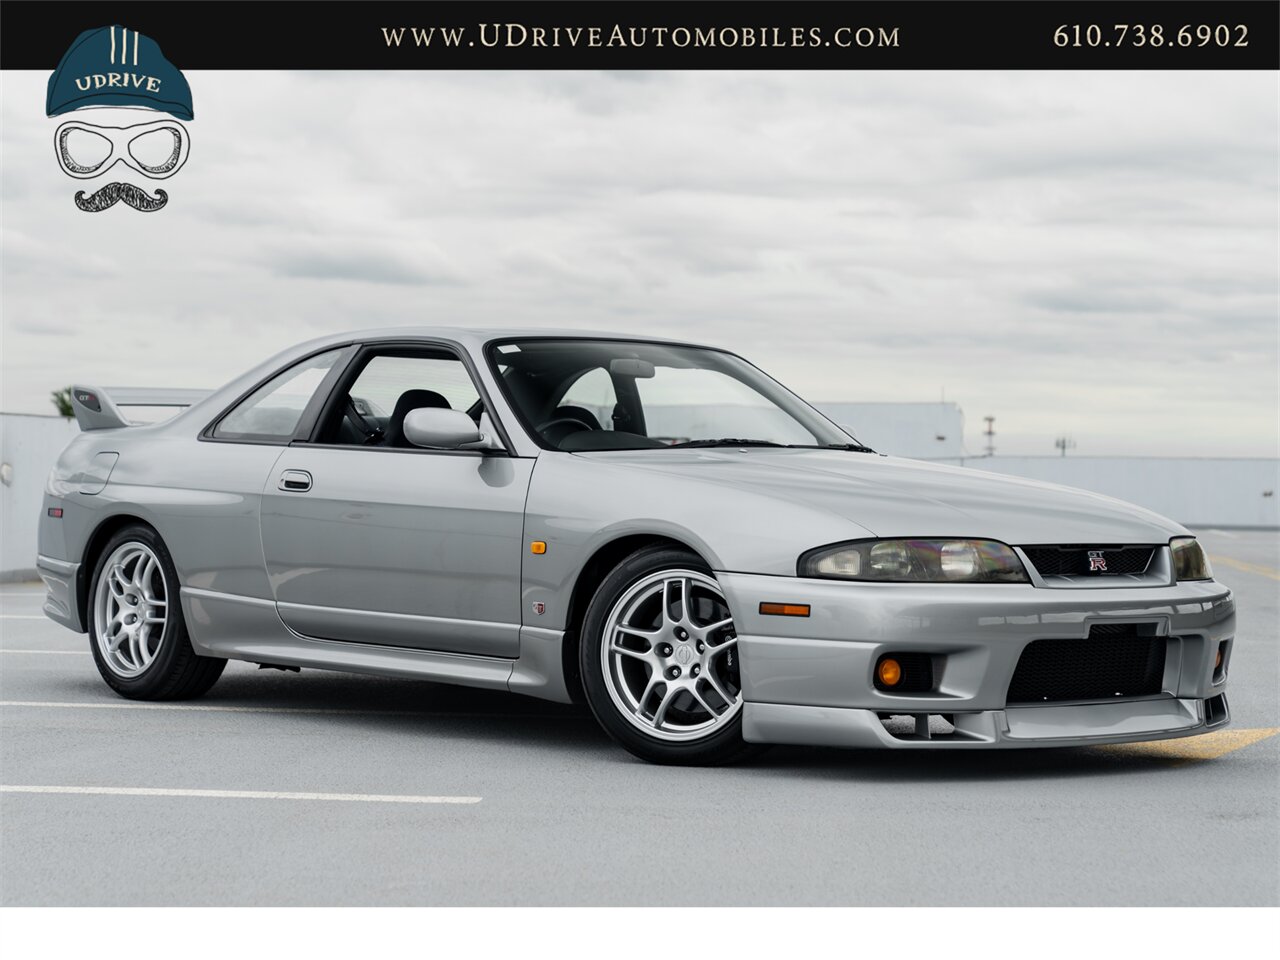 1997 Nissan Skyline GT-R R33 28k Miles Collector Grade  Motorex Legally Imported Titled Federalized Service History - Photo 3 - West Chester, PA 19382